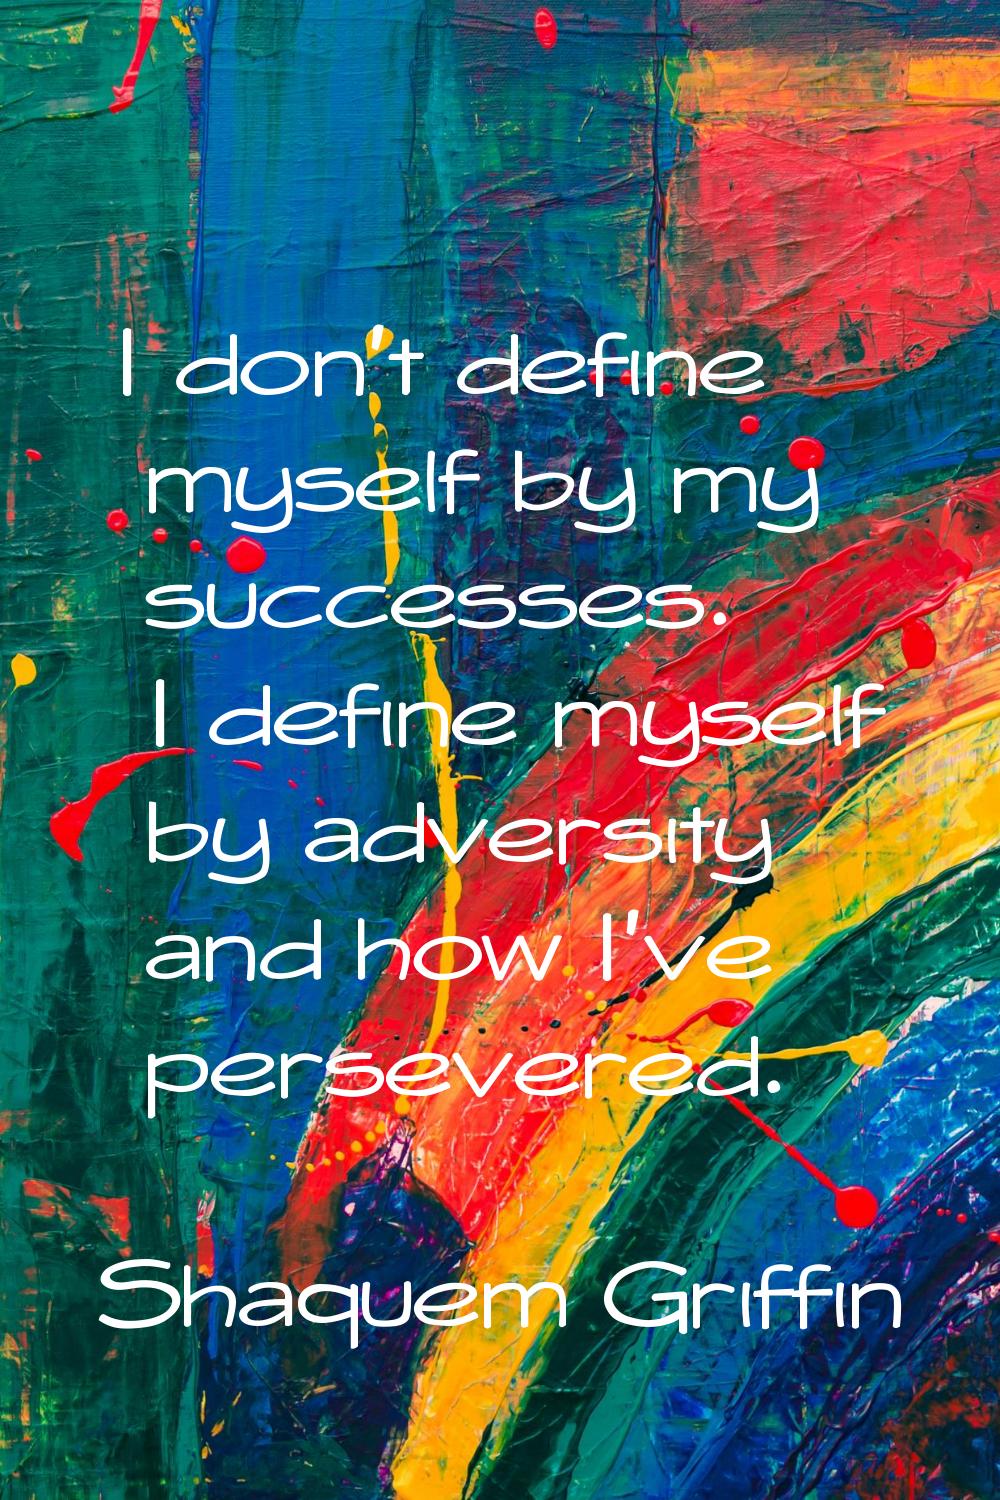 I don't define myself by my successes. I define myself by adversity and how I've persevered.